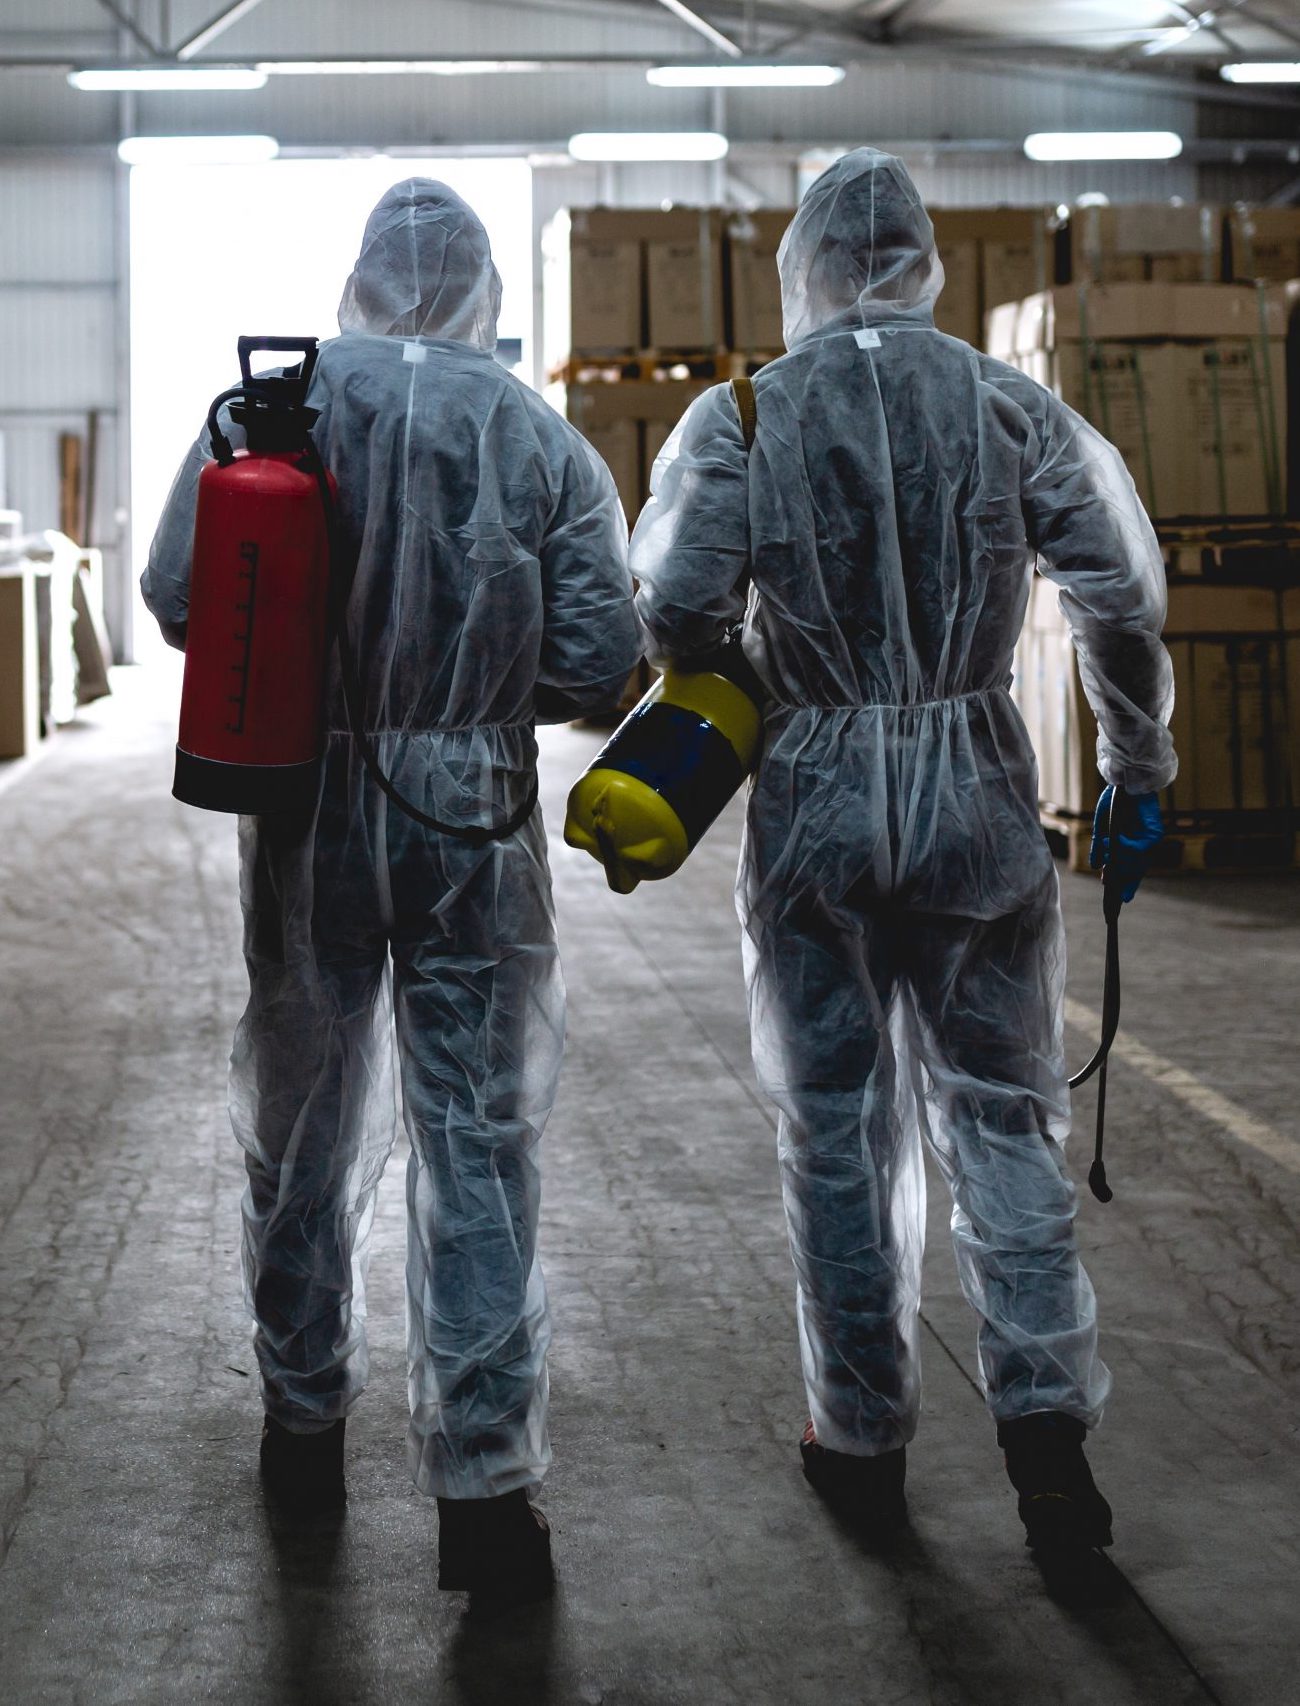 Two men in hazmat suits cleaning a warehouse